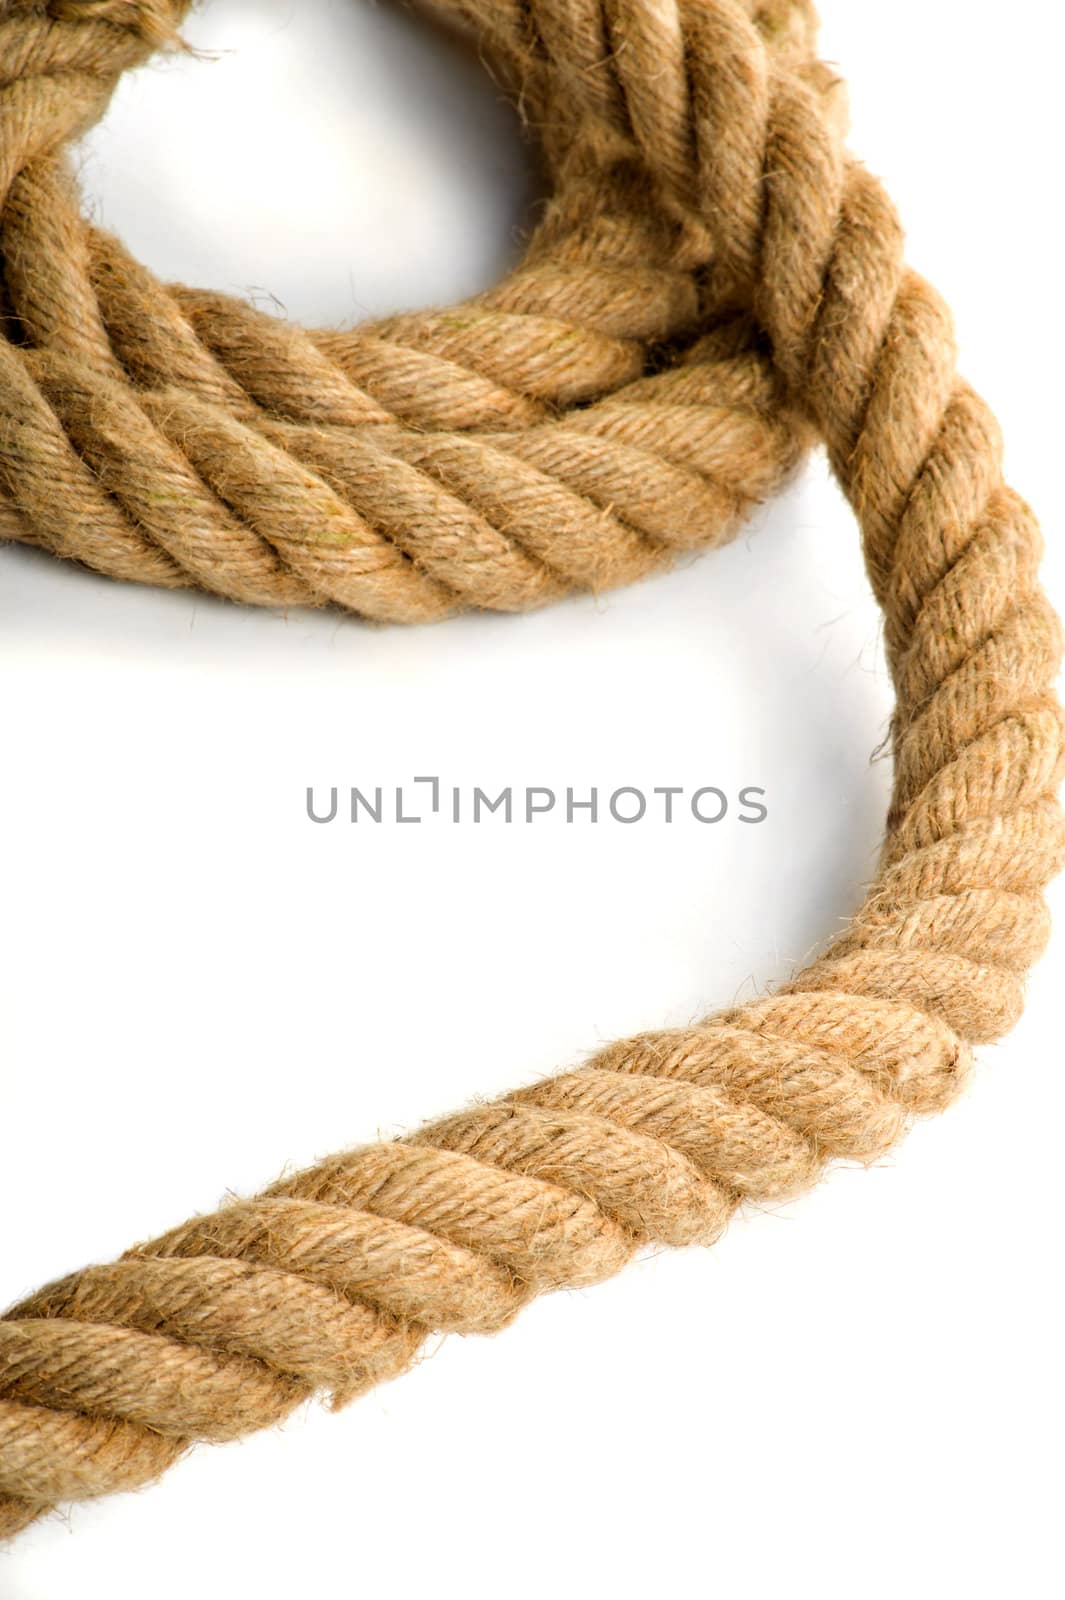 Chaotic coils of a thick rope on a white background